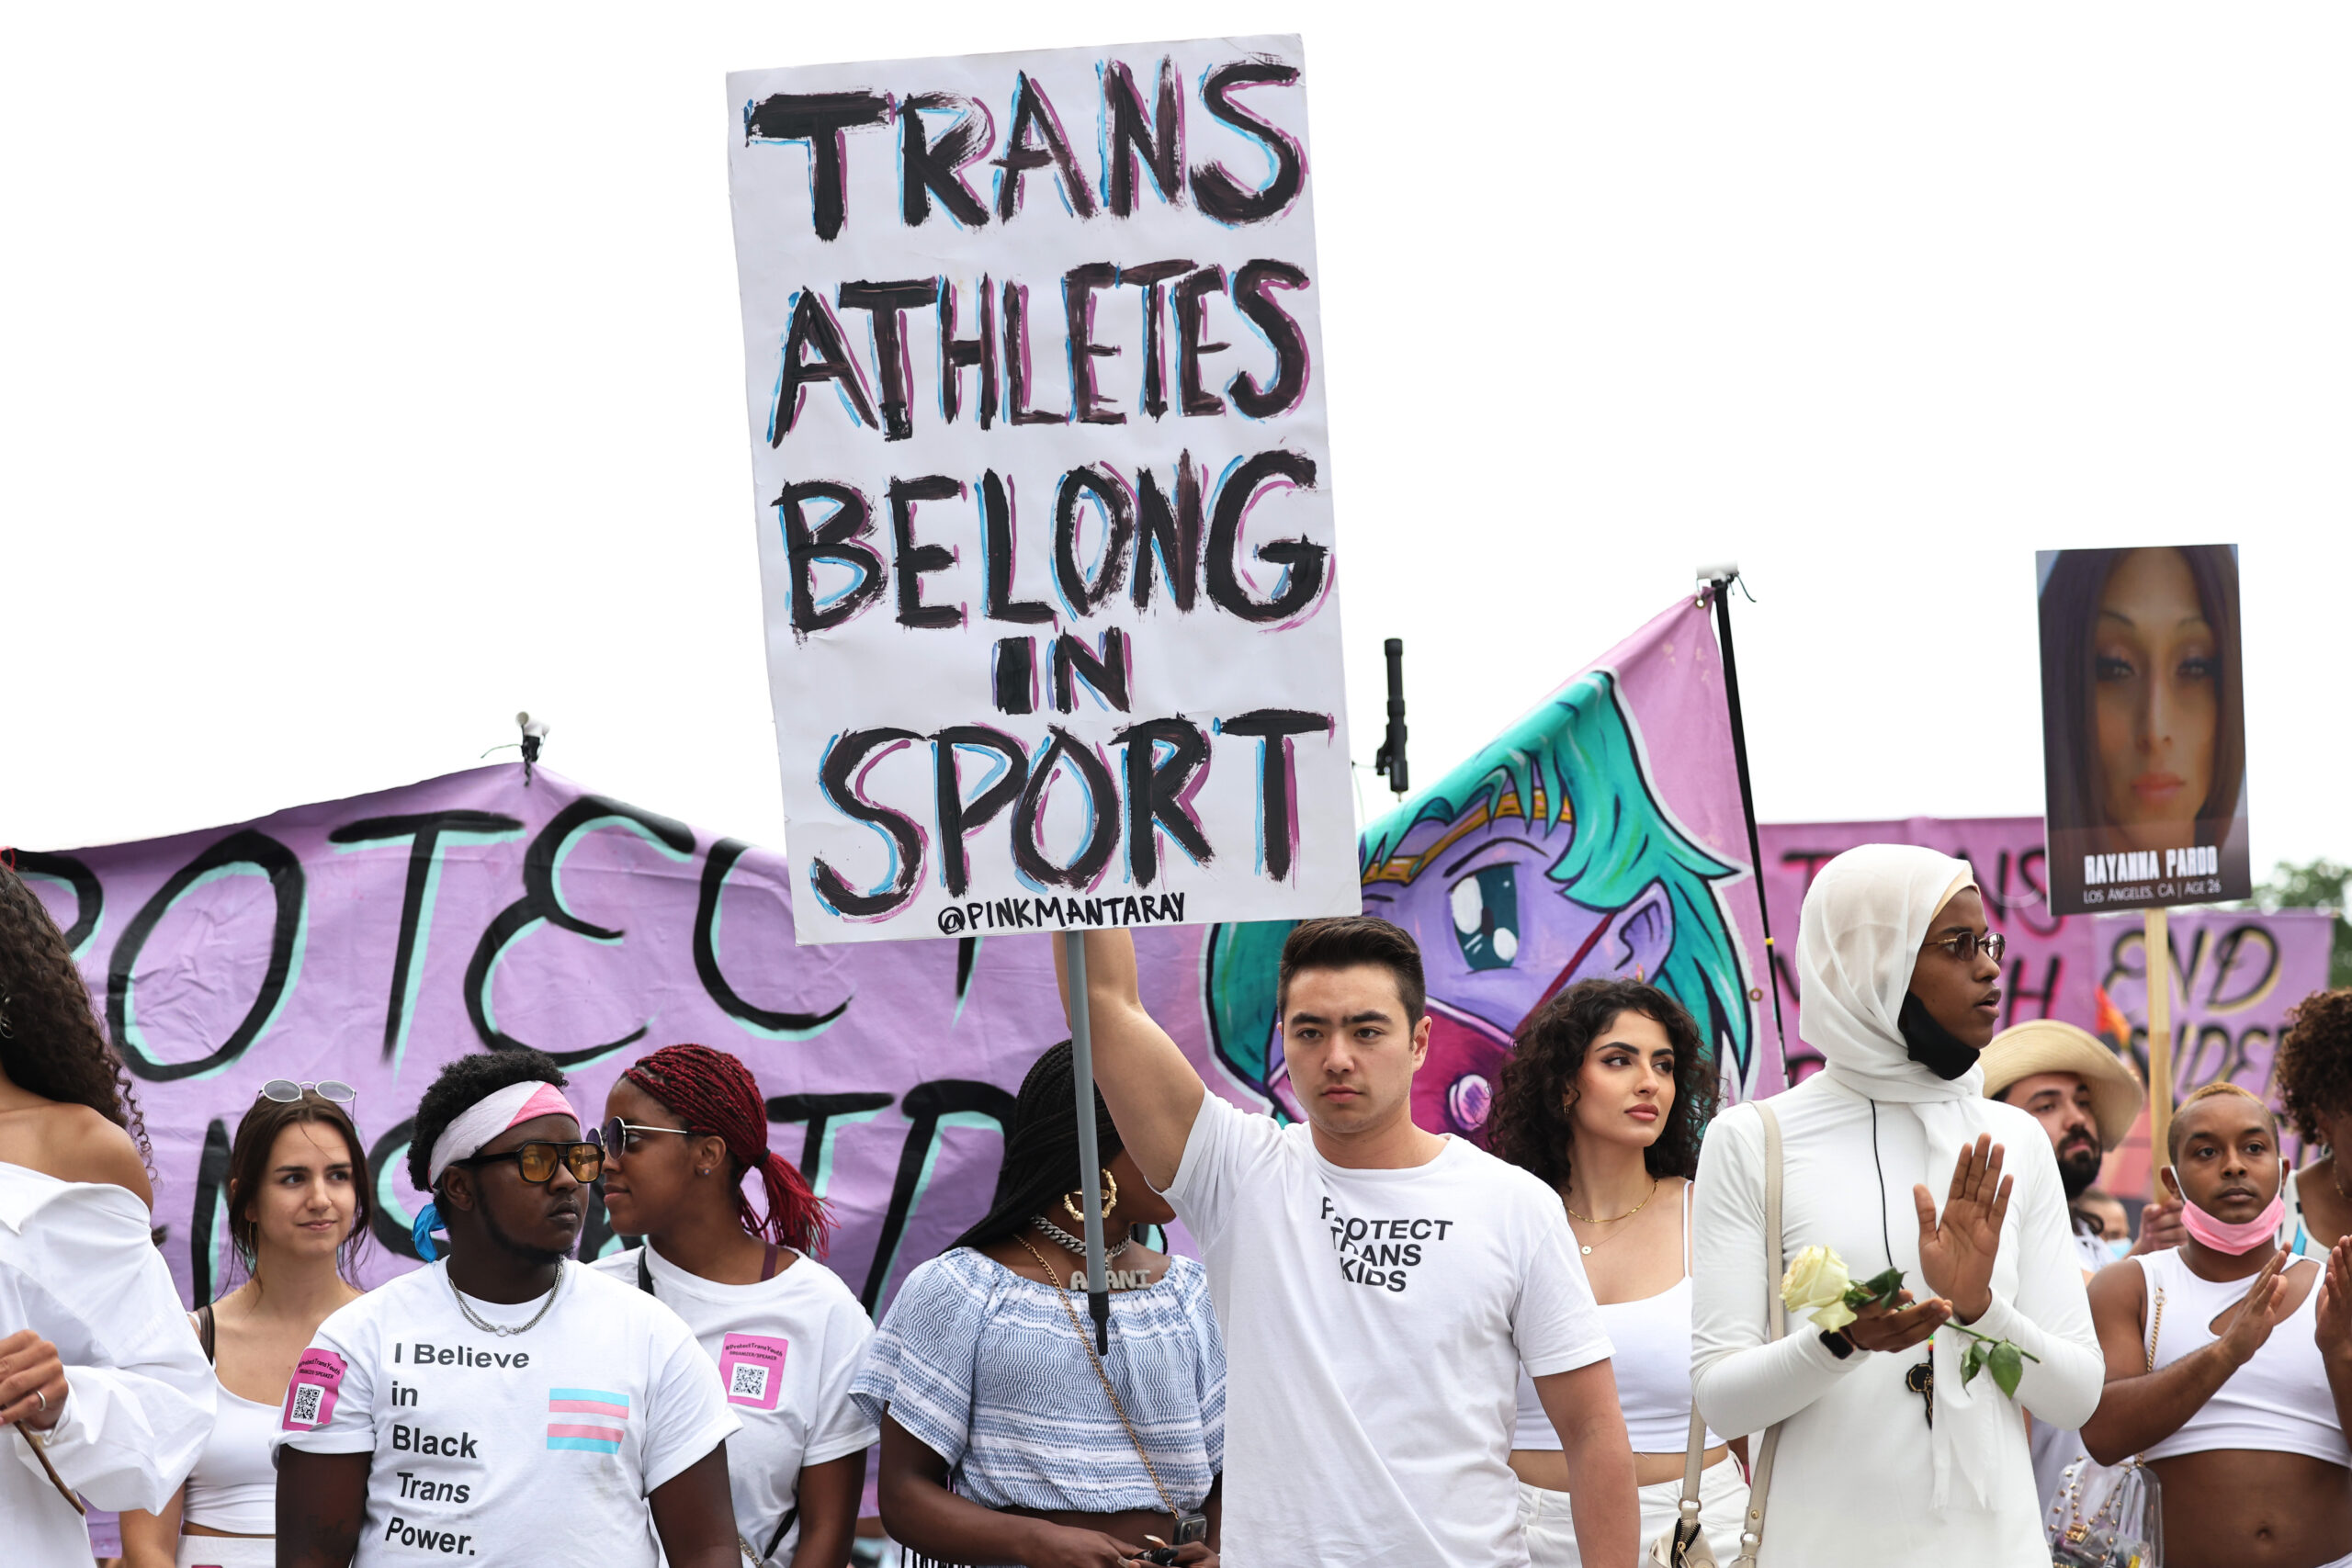 activists protest for transgender rights, one holding a sign that reads 'trans athletes belong in sport'